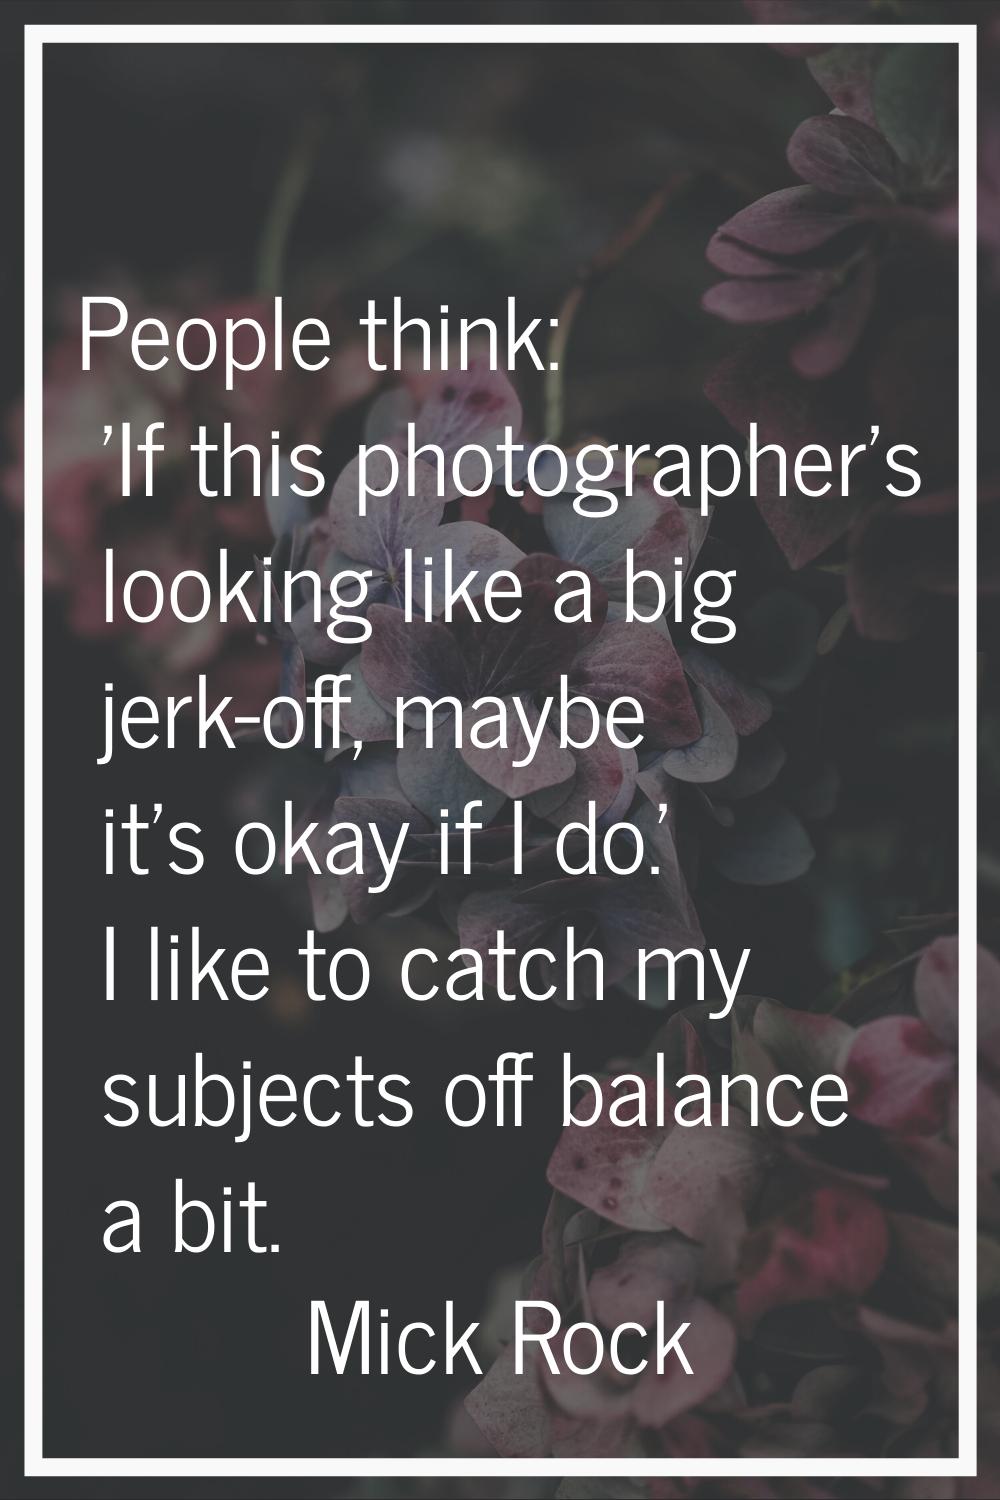 People think: 'If this photographer's looking like a big jerk-off, maybe it's okay if I do.' I like